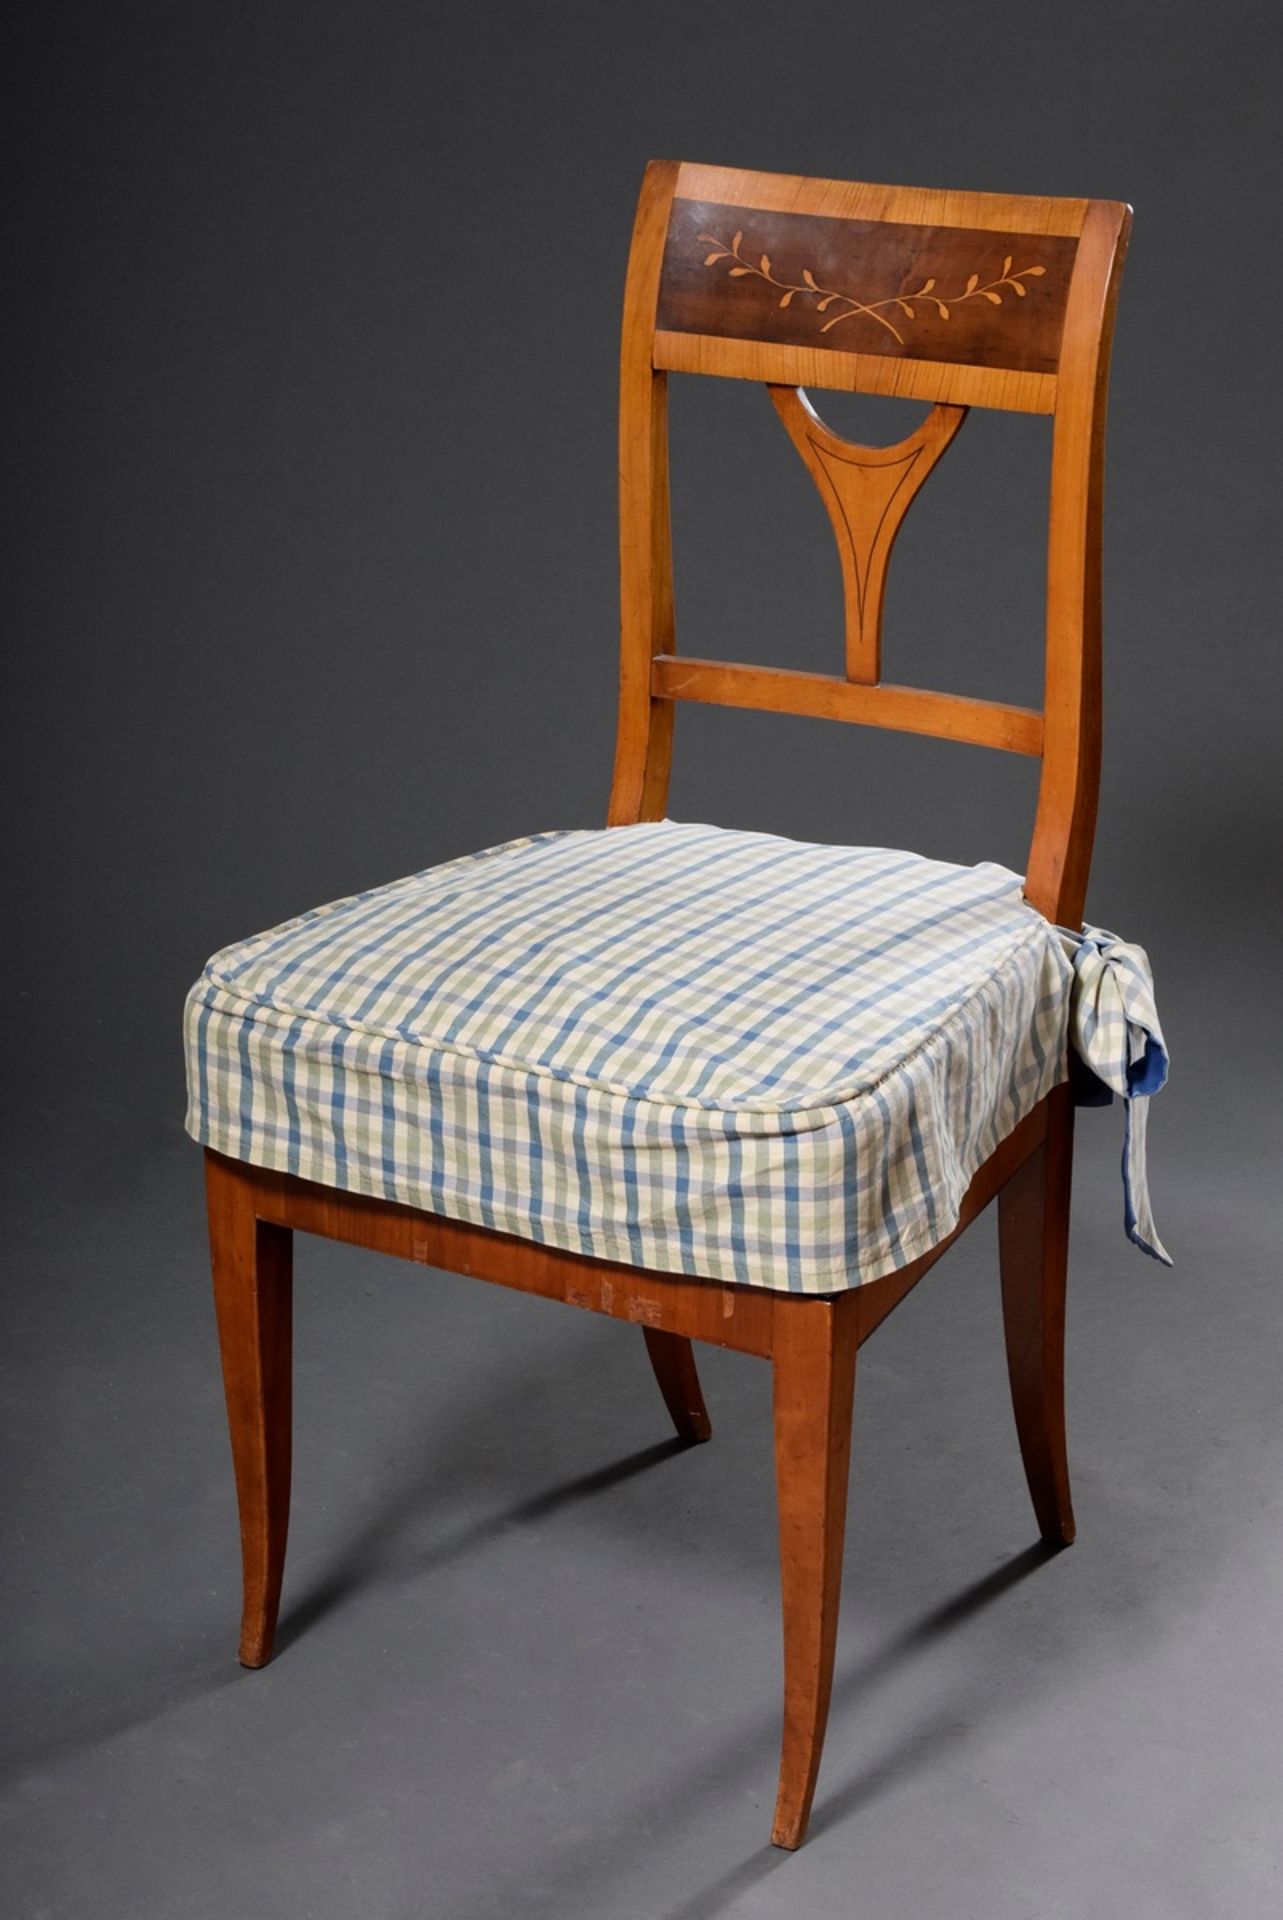 6 Biedermeier chairs on sabre legs with floral inlays in the backrest, plus: removable covers and 3 - Image 3 of 7